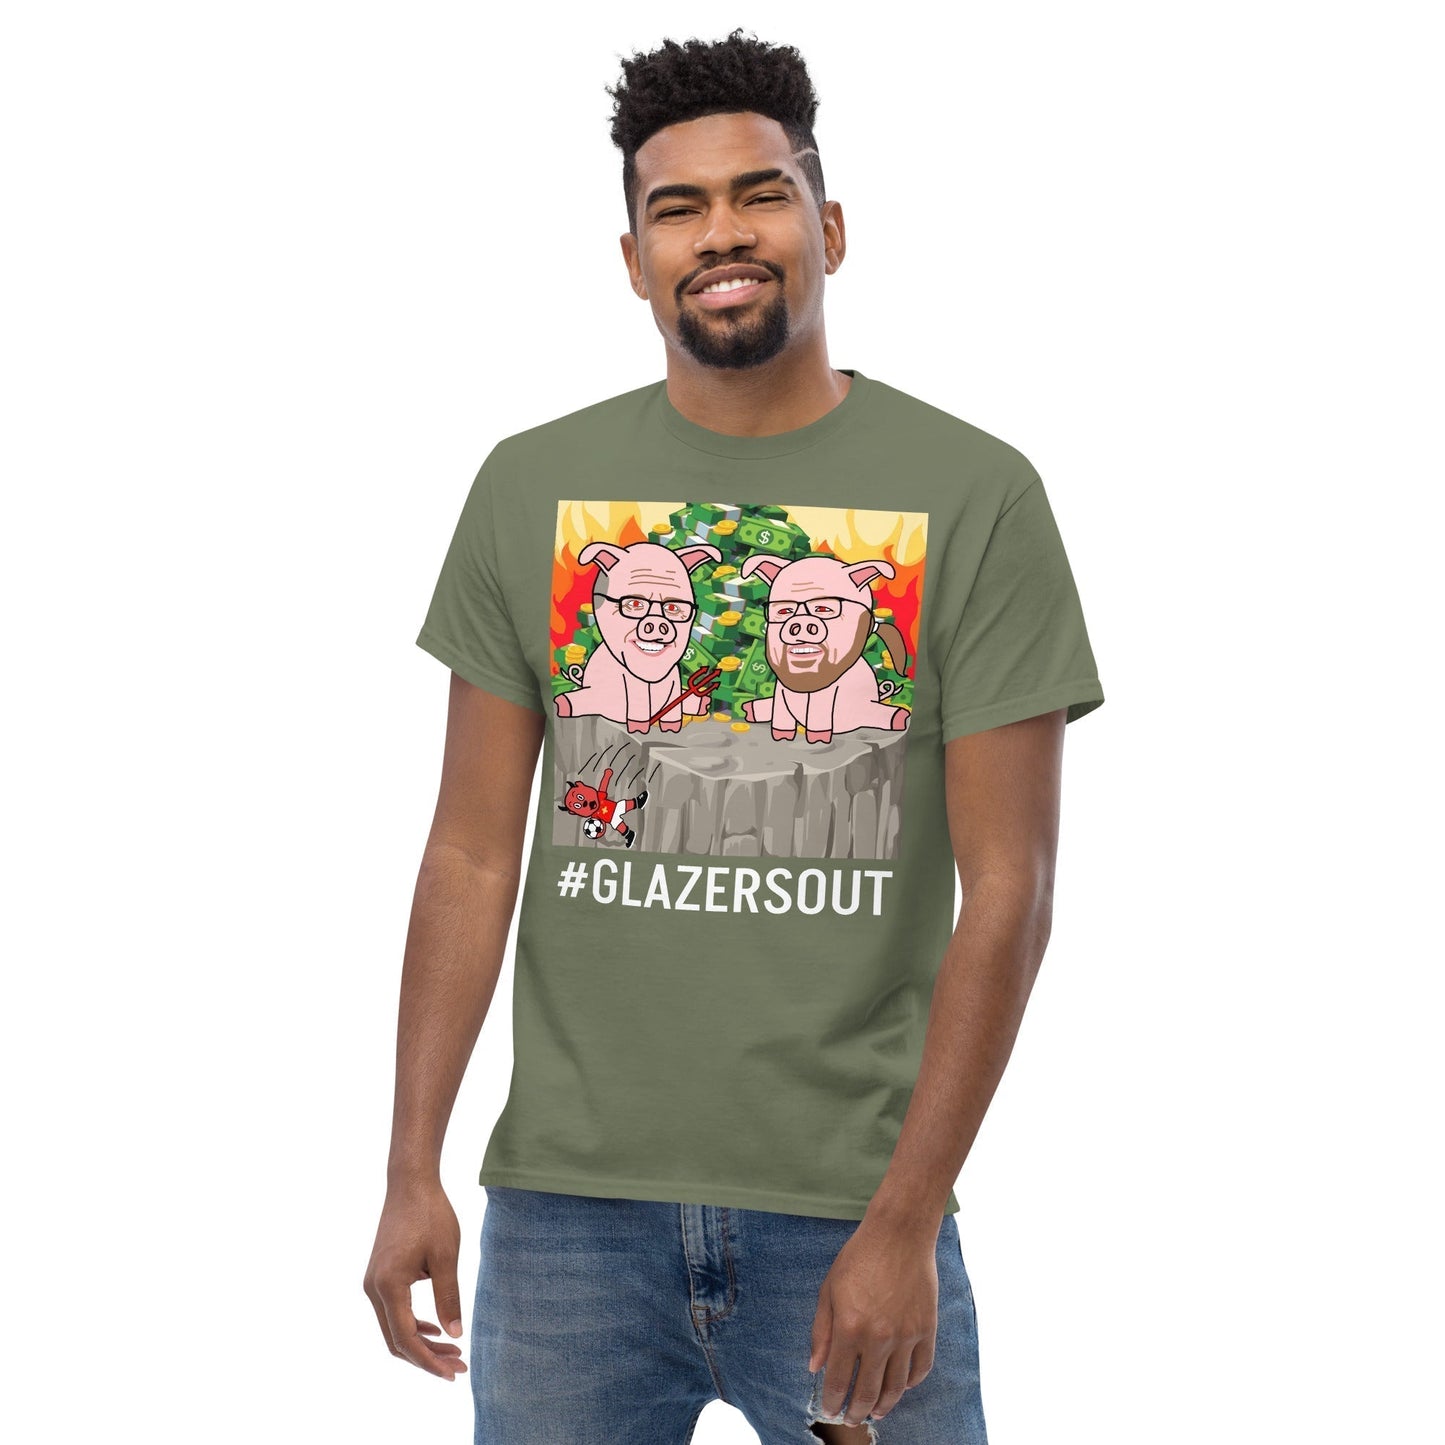 Glazers Out Manchester United T-shirt, White Letters, #GlazersOut Next Cult Brand Football, GlazersOut, Manchester United